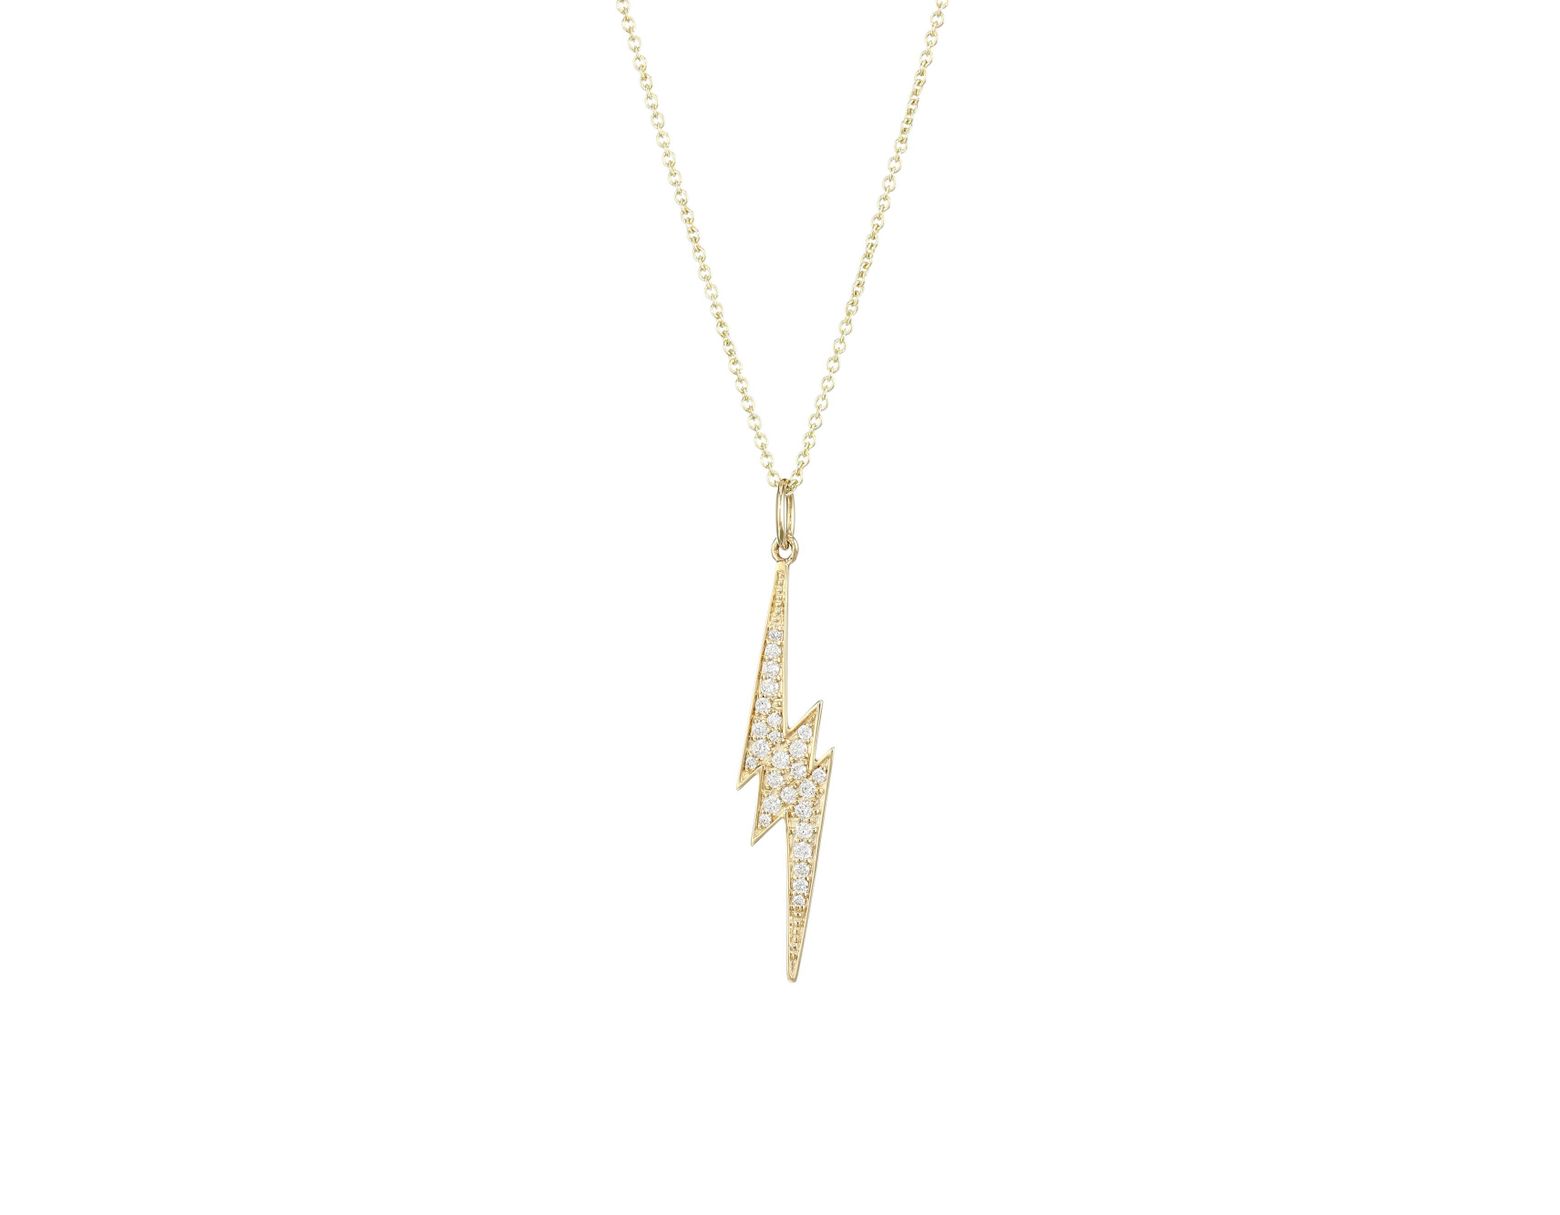 Lightning Bolt Pendant Necklace 14K Yellow Gold Over Sterling Silver